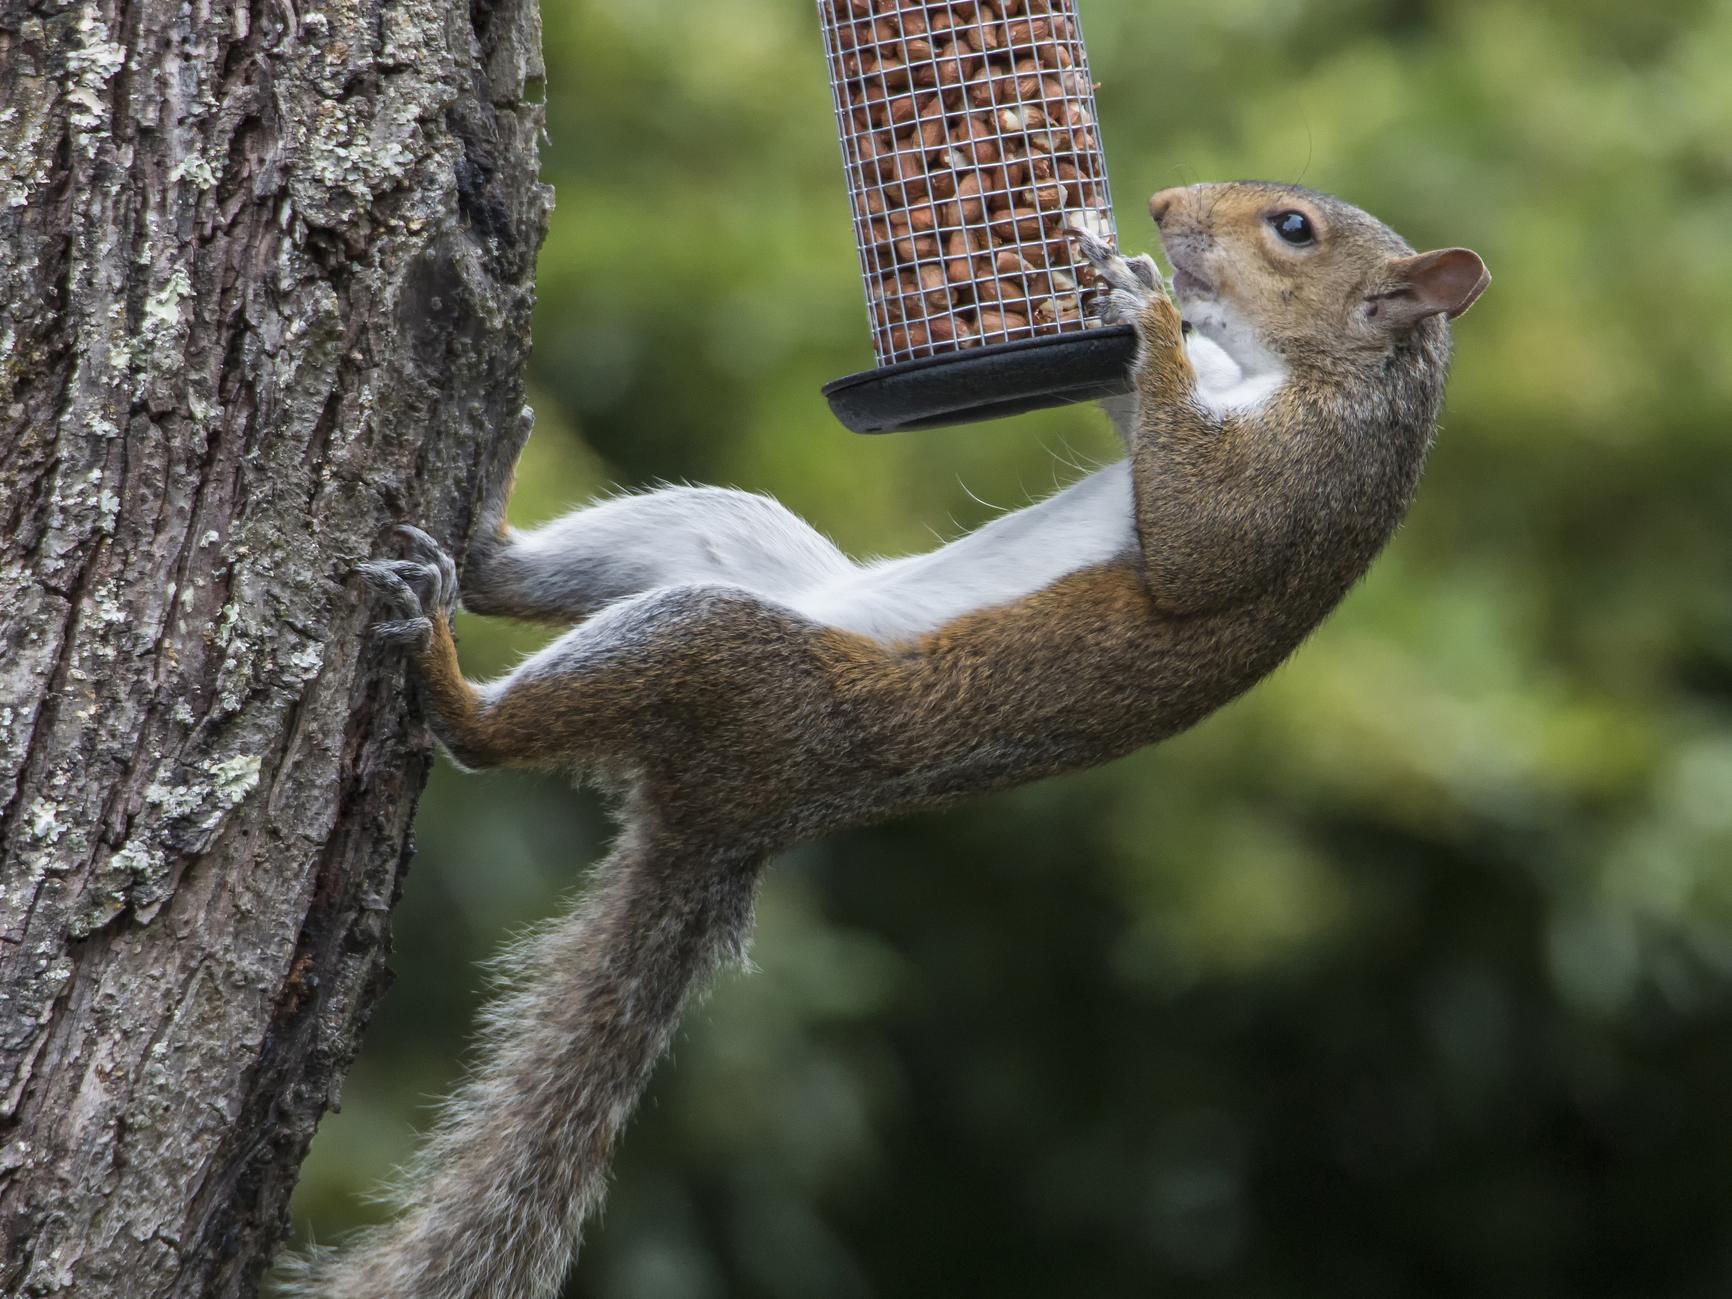 Grey squirrels fared better than reds in difficult food-extraction tasks set by researchers